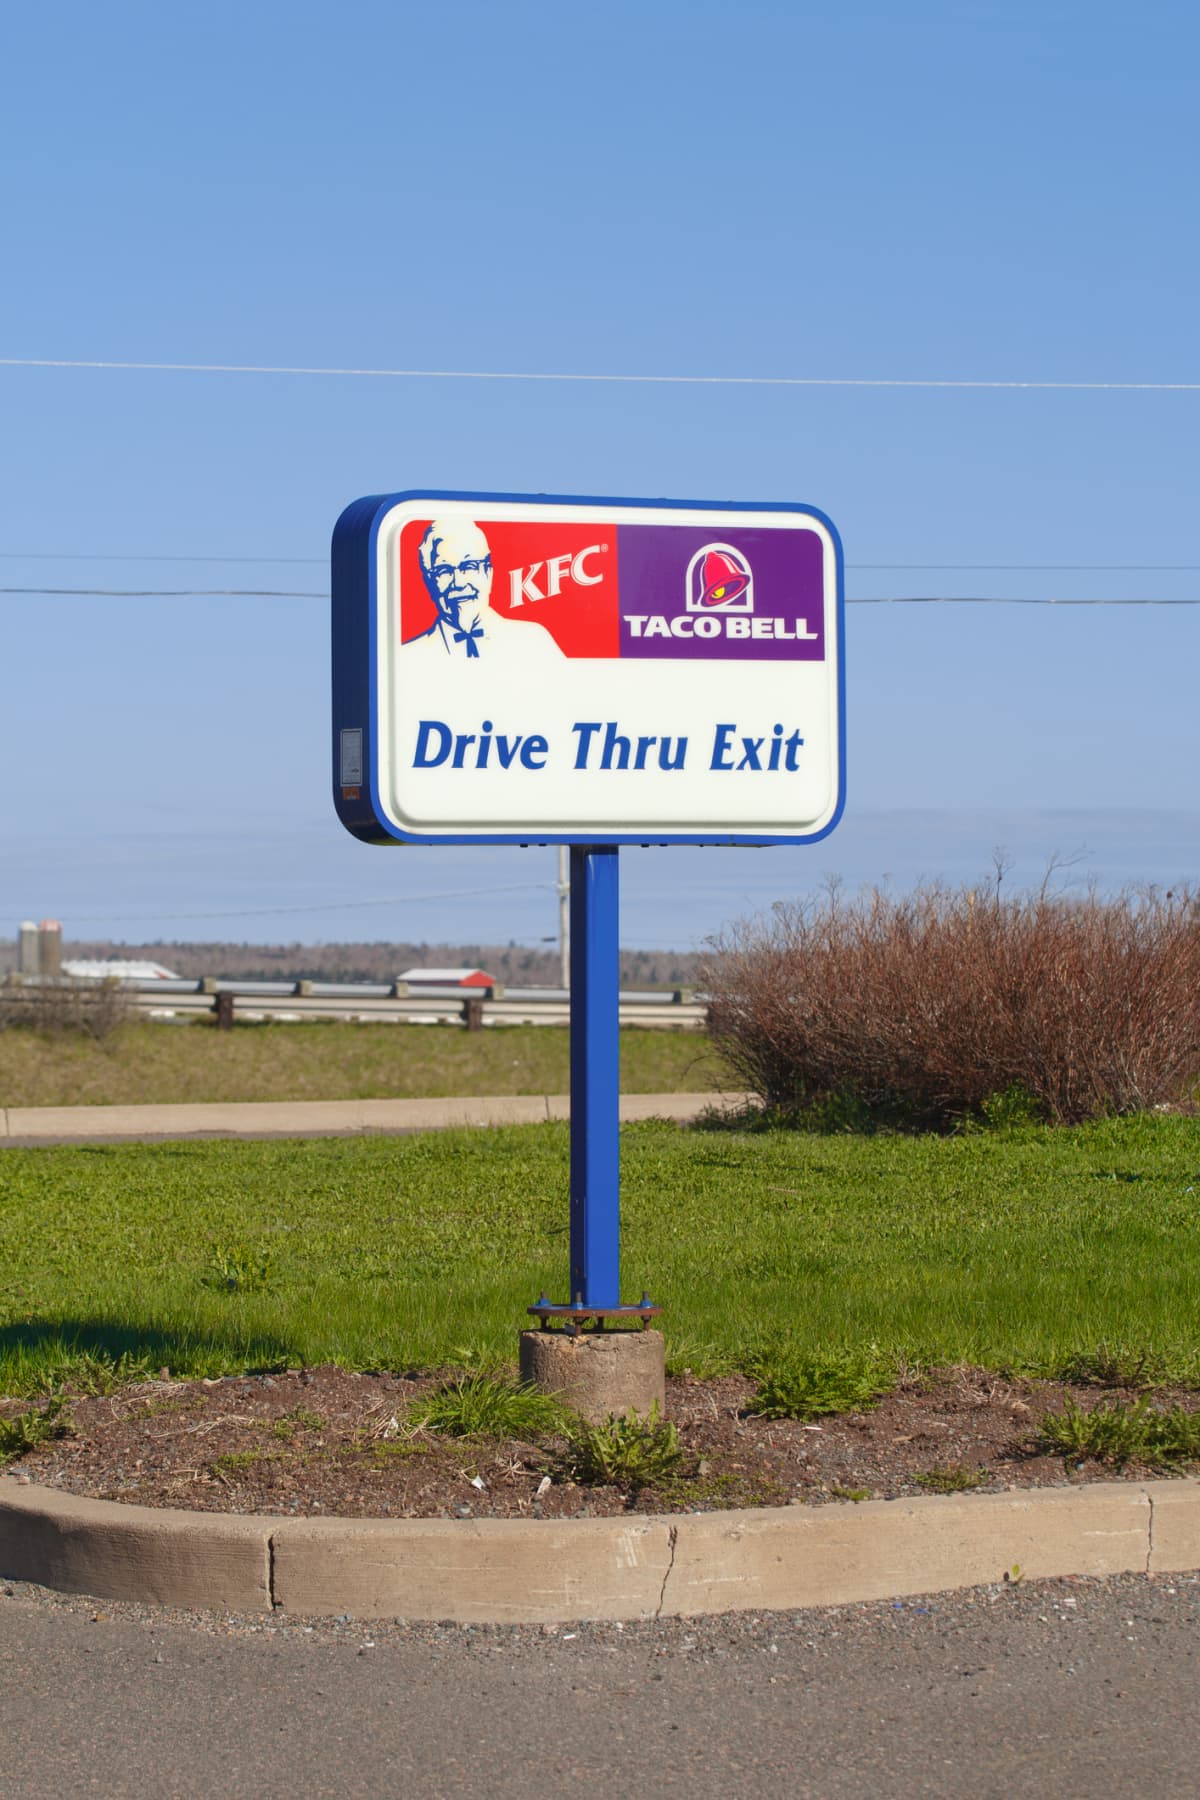 Stewiacke, Canada - May 8, 2018: KFC or Kentucky Fried Chicken is a fast food restaurant chain specializing in fried chicken.